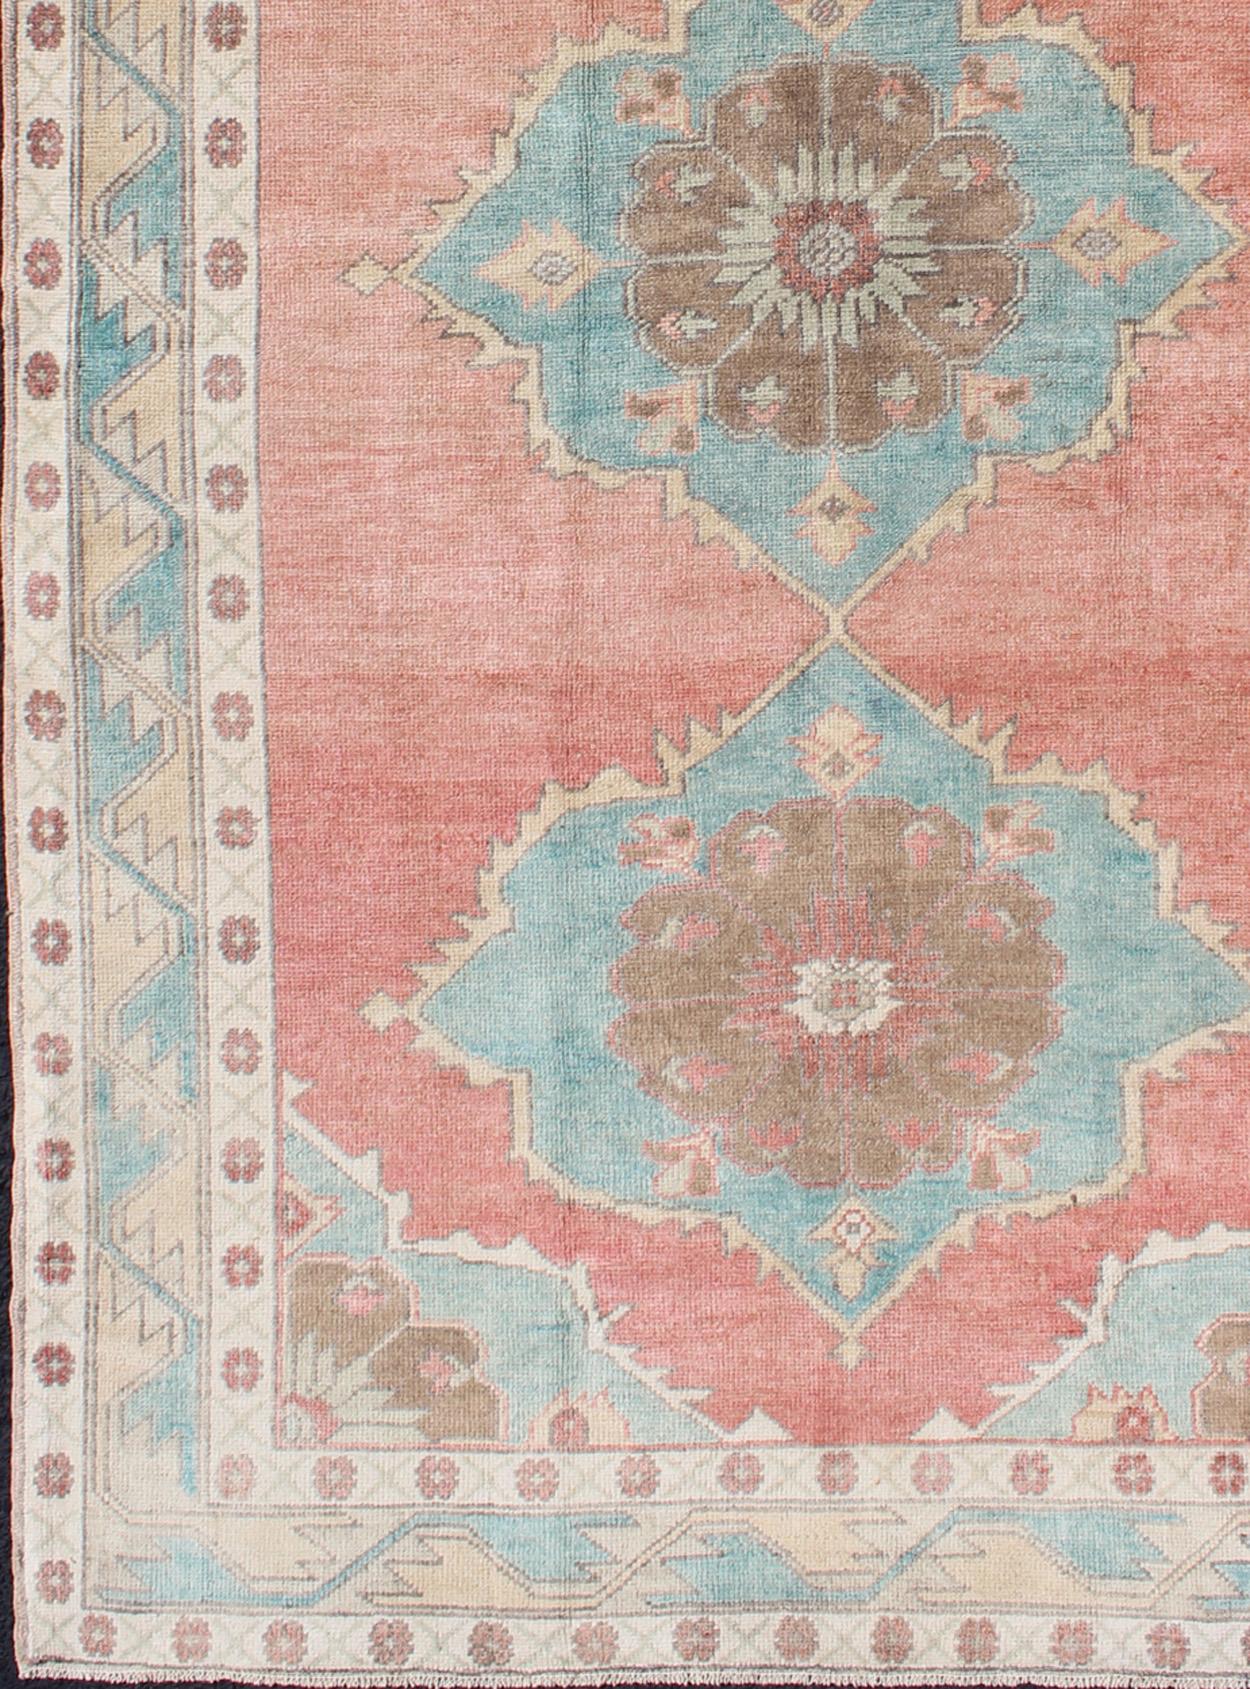 Vintage Oushak rug from 1940s Turkey with Medallion Design in Shades of peach, orange, nude, taupe, and gray, rug en-176153, country of origin / type: Turkey / Oushak, circa 1940

This striking vintage Turkish Oushak rug bears a peachy-orange body